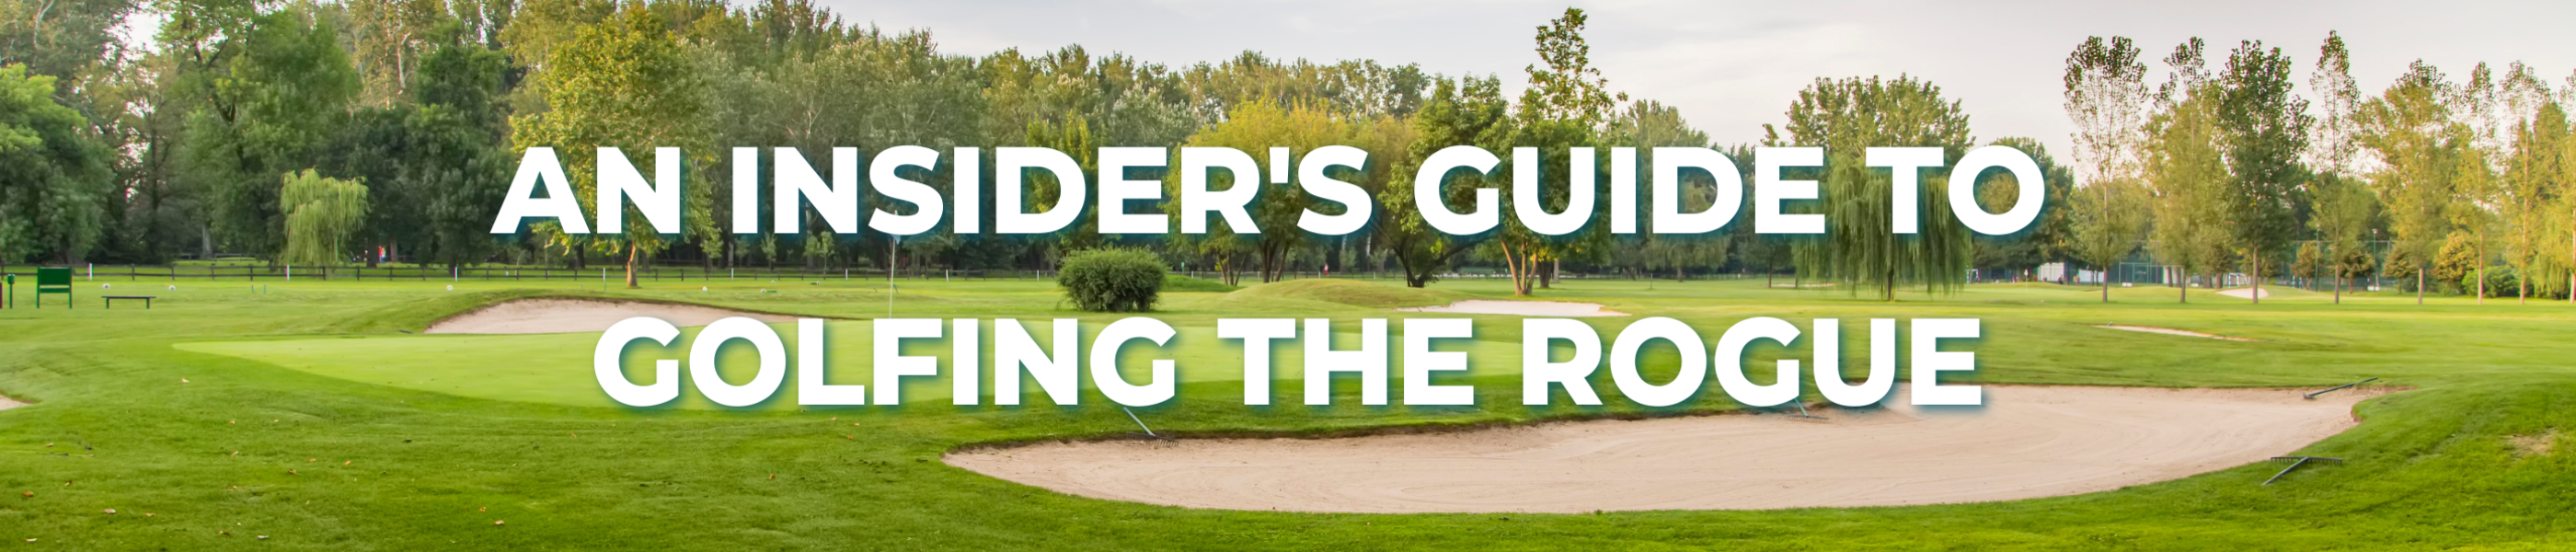 blog header, an insiders guide to golfing the rogue